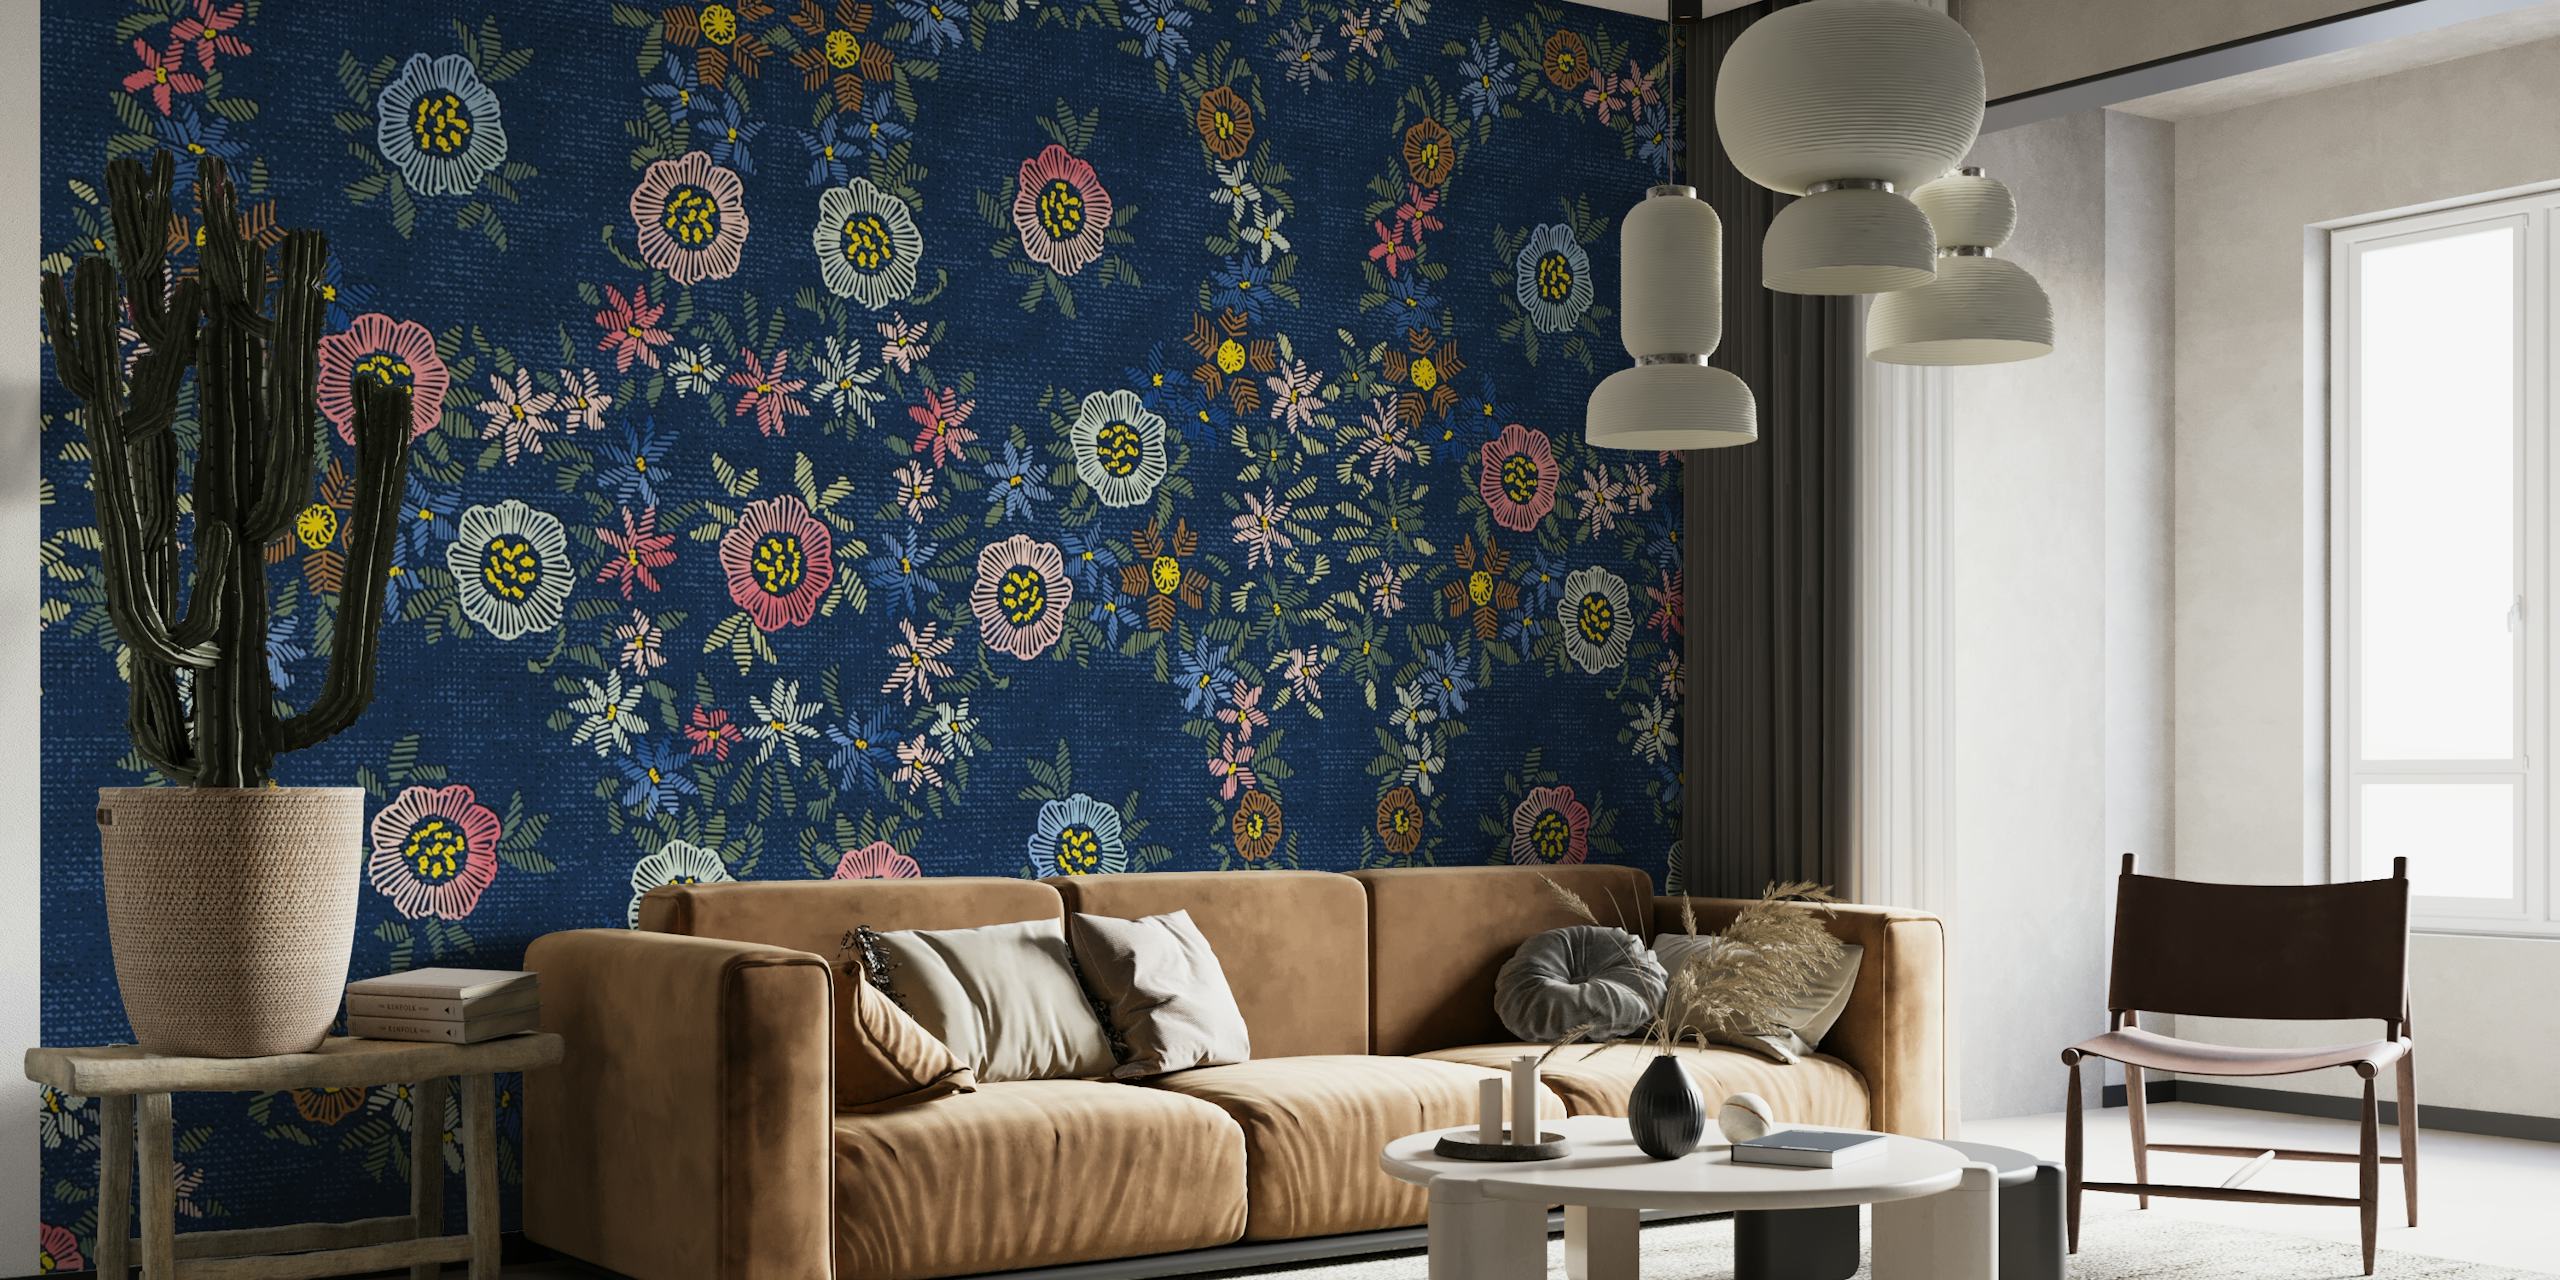 Vibrant floral embroidery on dark blue wallpaper from Happywall